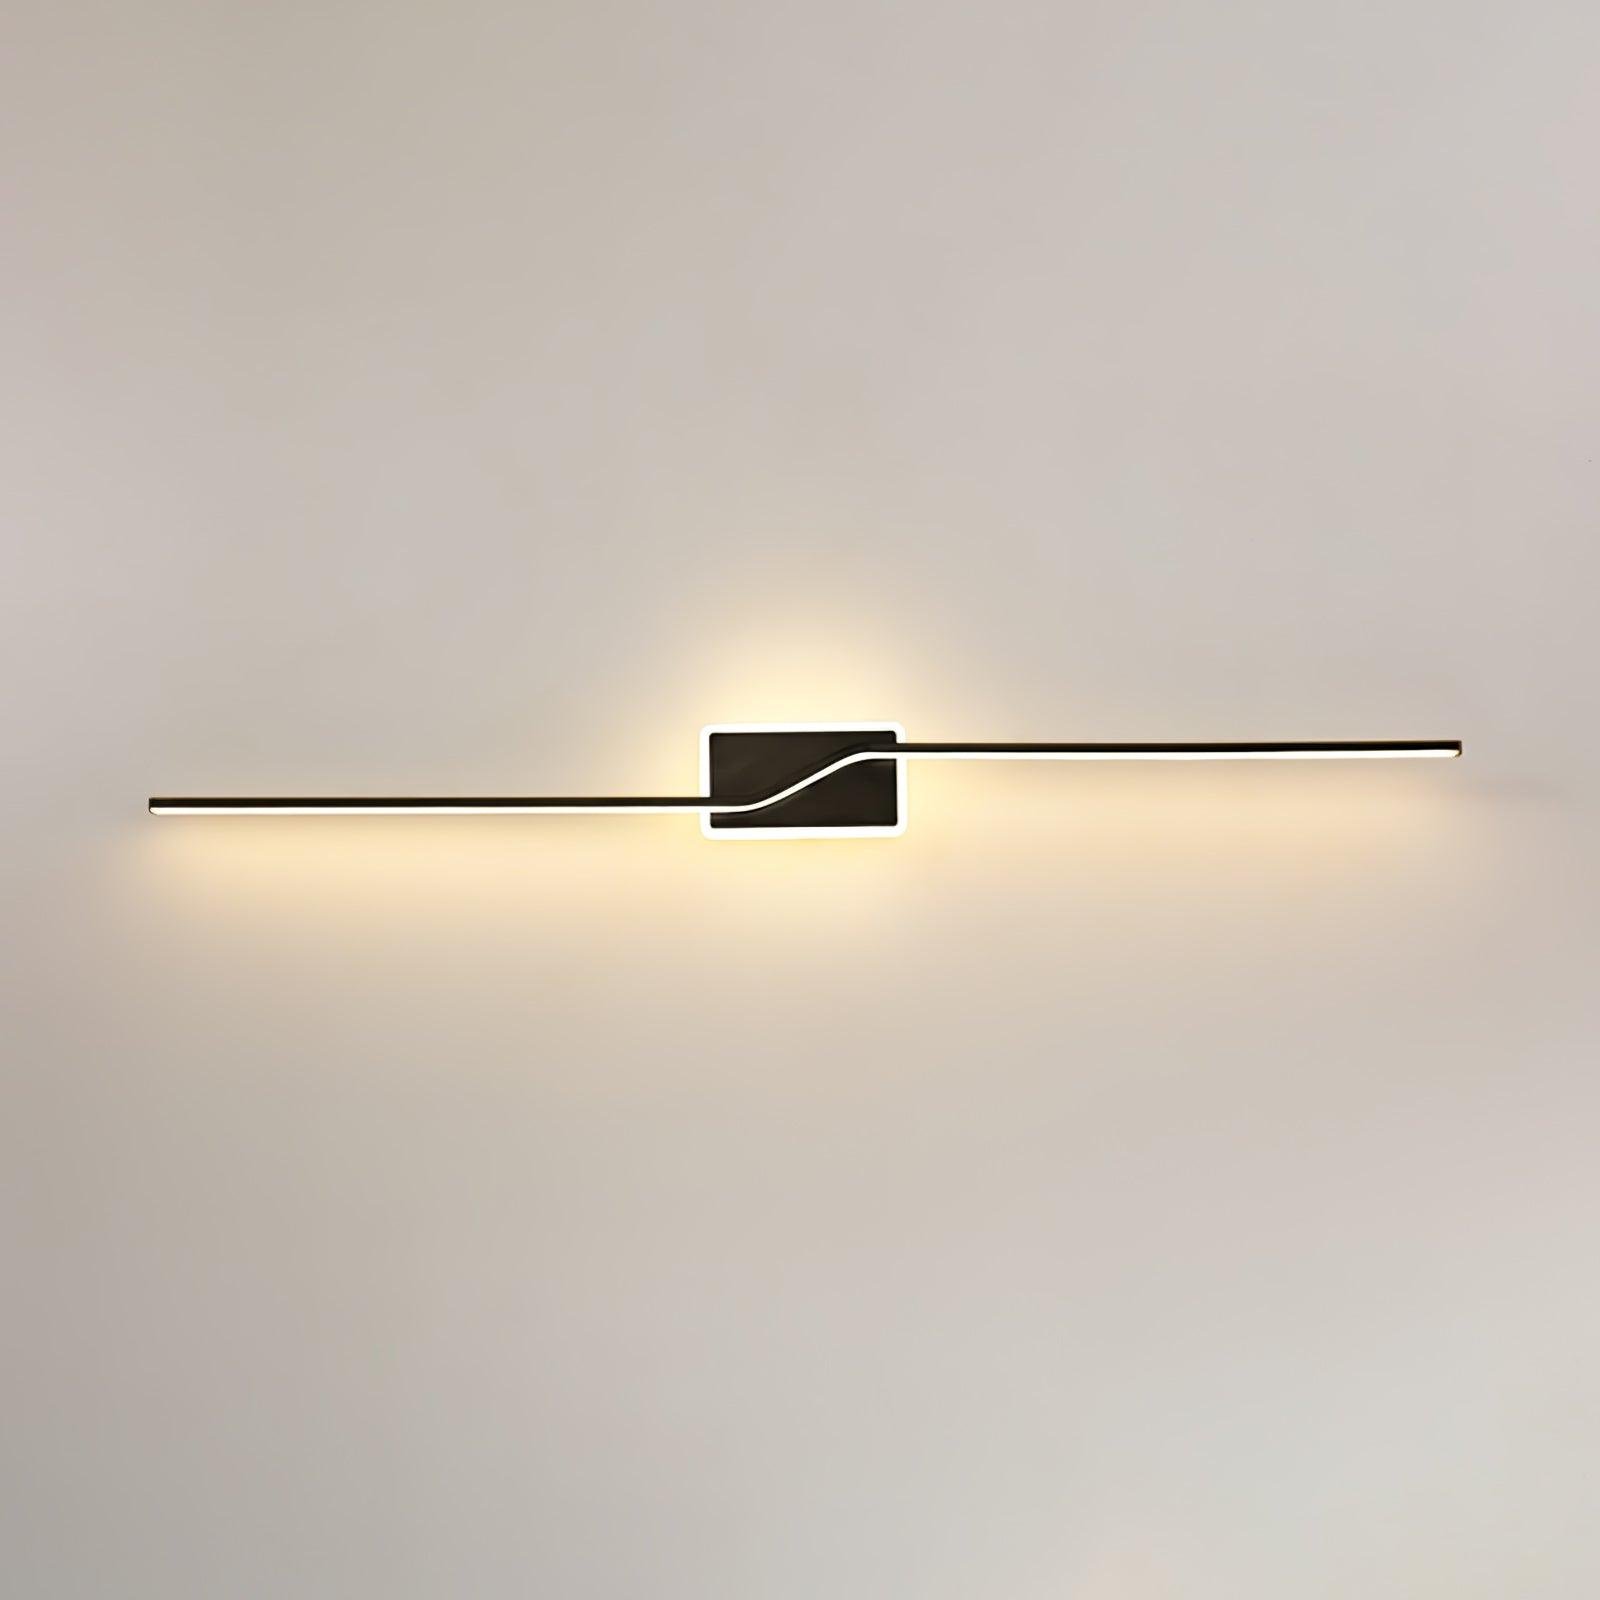 Black Linear Strip Design Wall Lights Set with Bi-color and Multicolor LED, Dimensions: 3.9 inches in Width and 31.5 inches in Height, Pack of 2.